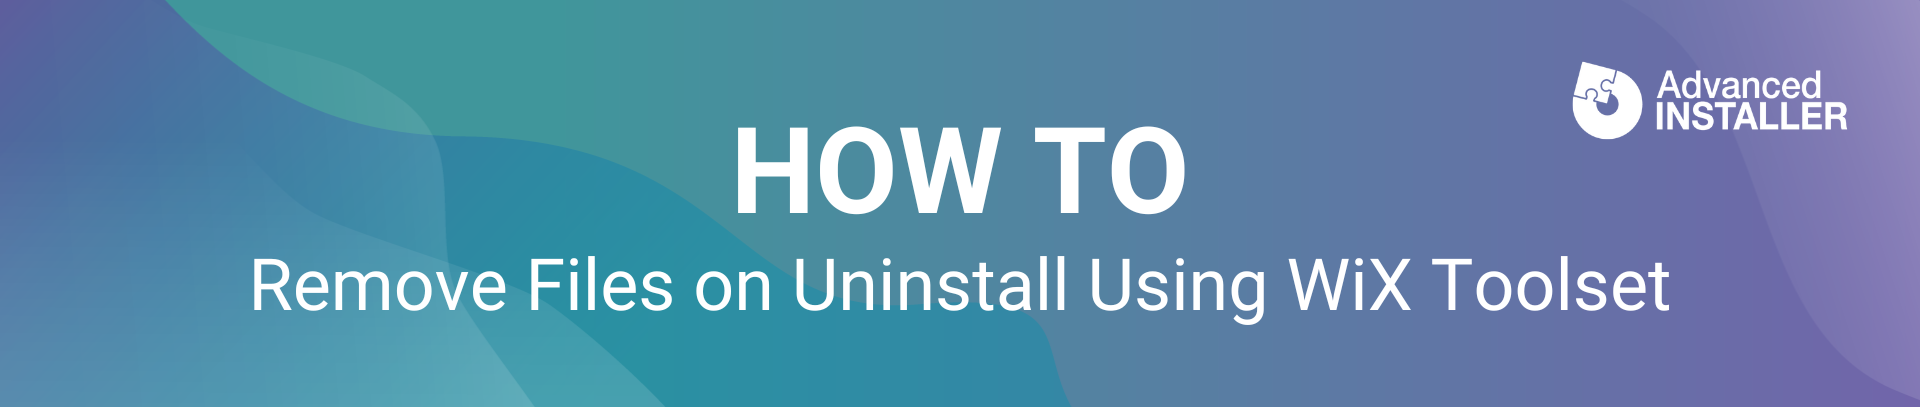 Wix toolset remove files on uninstall